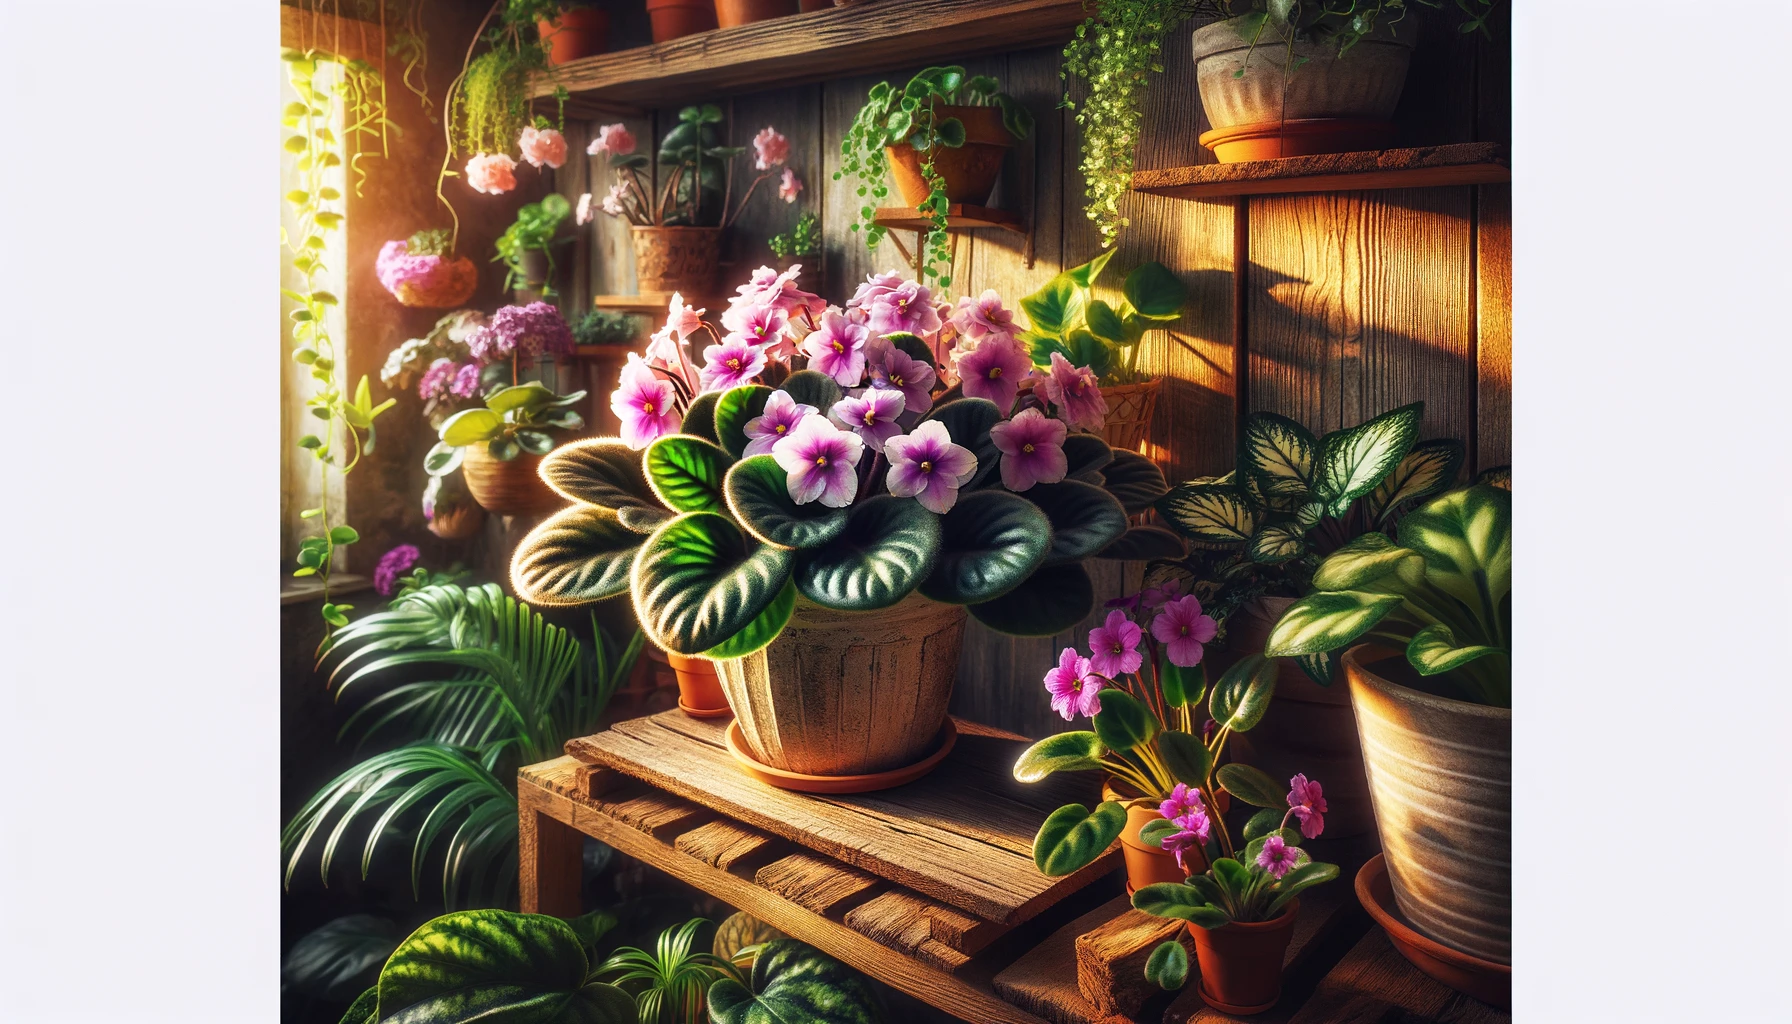 Sunlit indoor garden with vibrant potted plants and flowers.